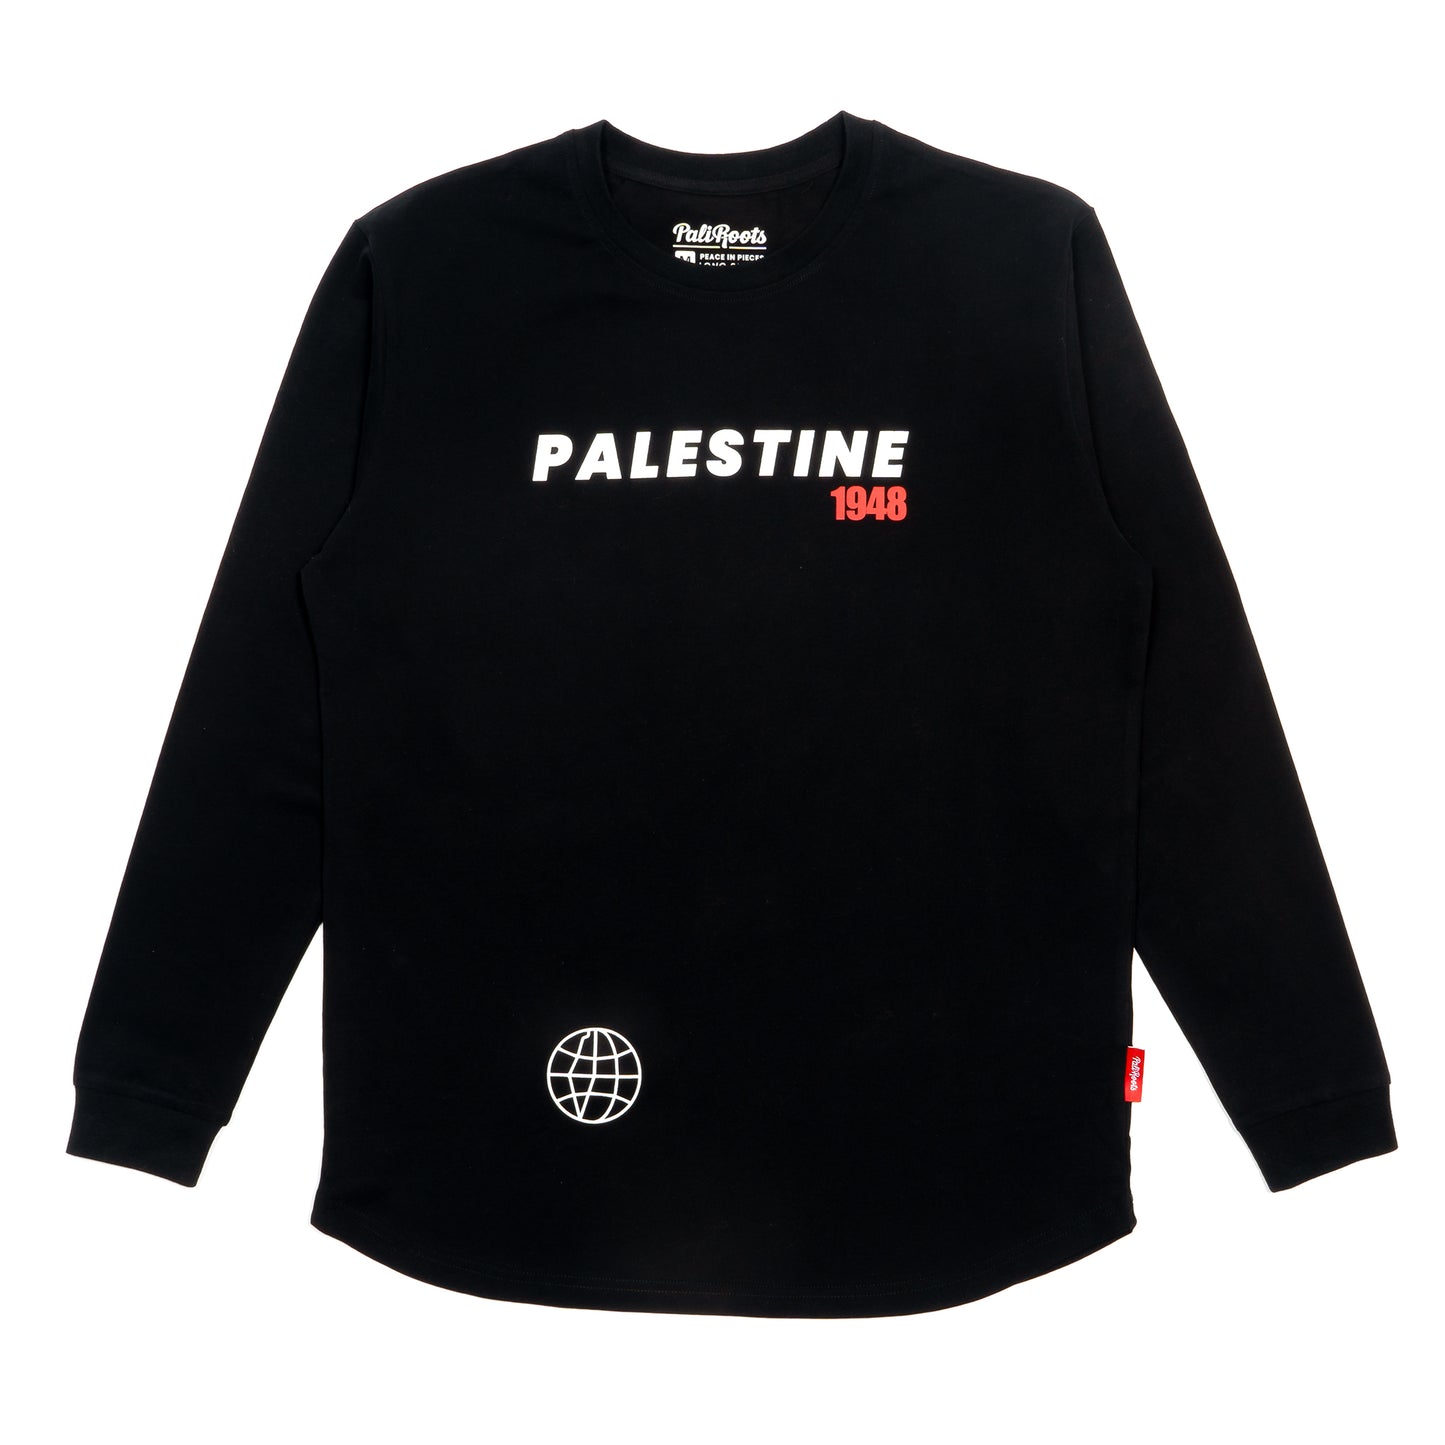 Peace in Pieces Long Sleeve